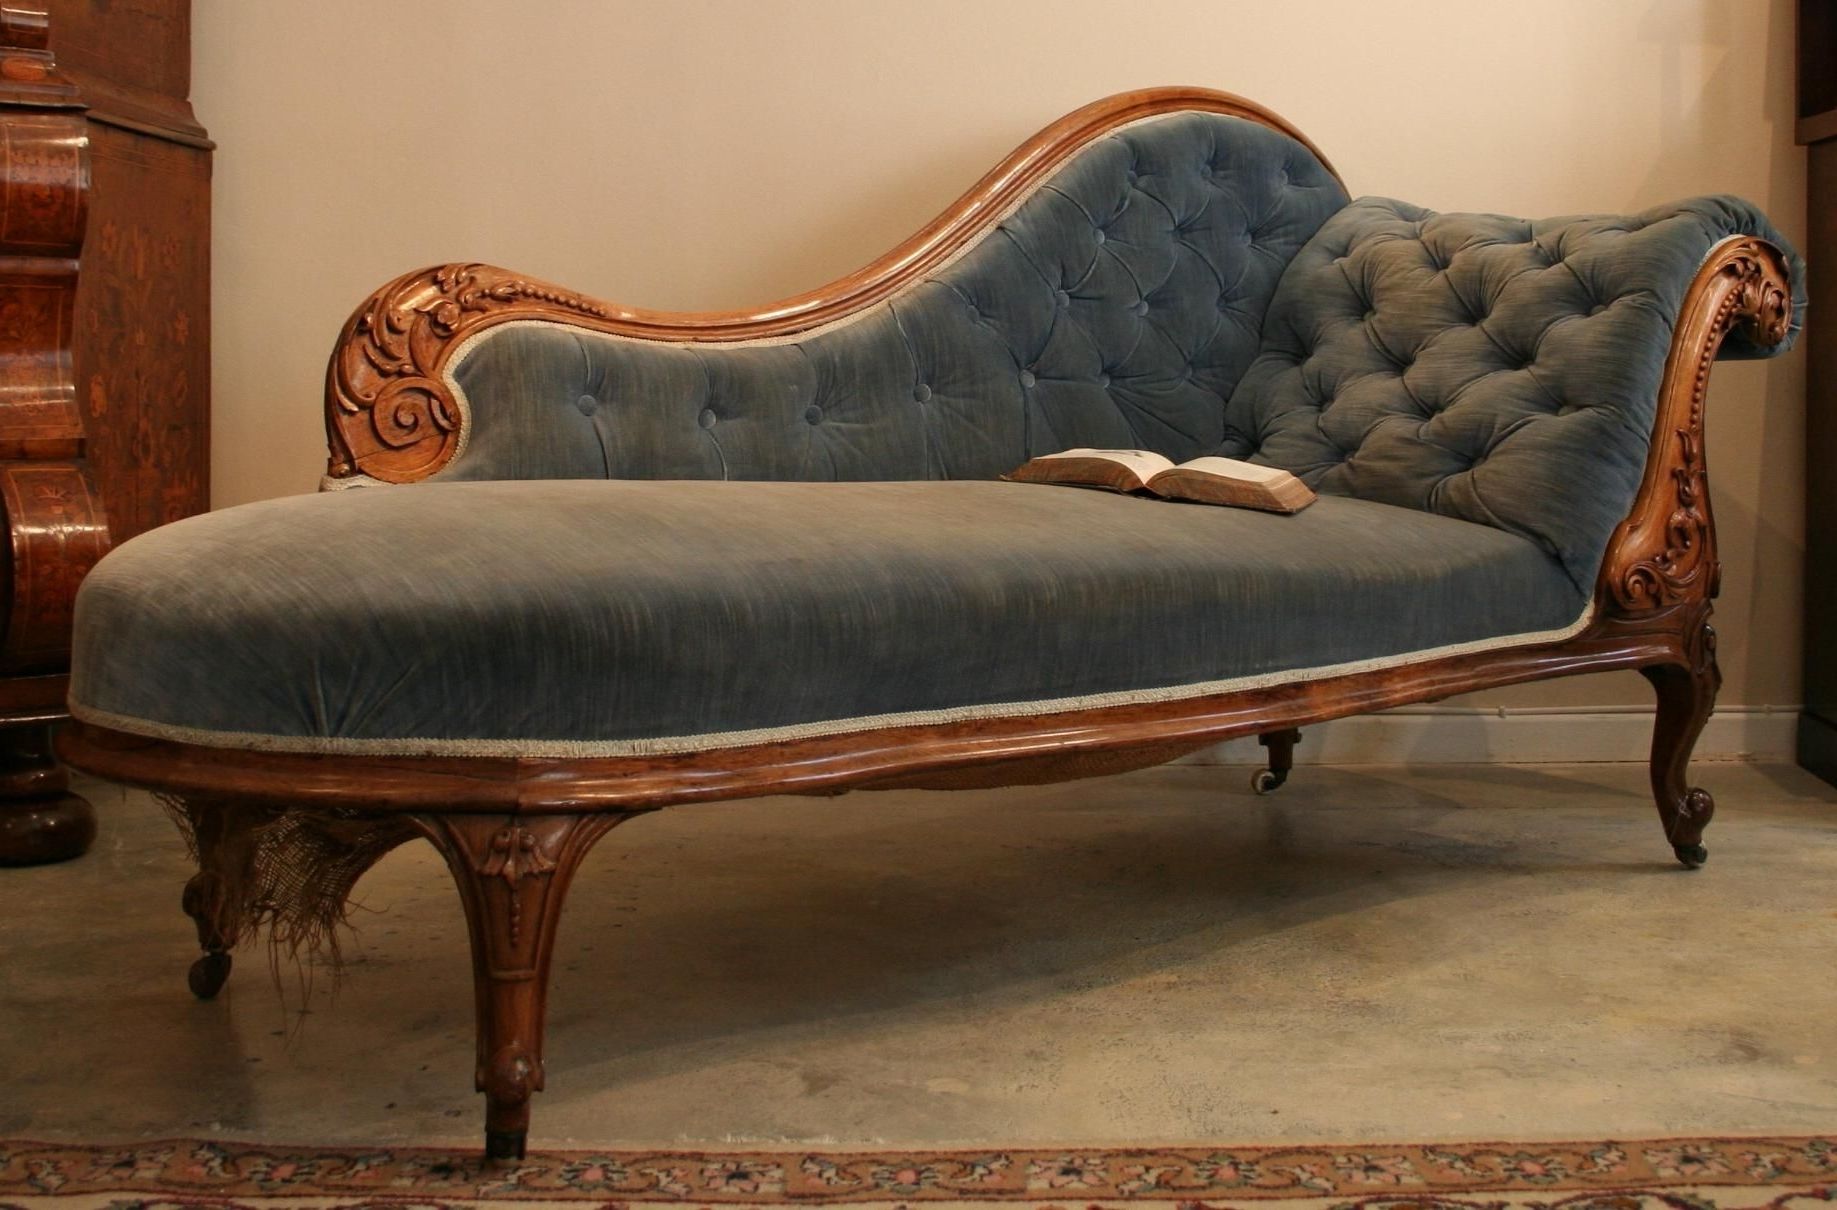 Chaise Lounges, Google Images And Fainting Couch With Recent Hardwood Chaise Lounge Chairs (View 15 of 15)